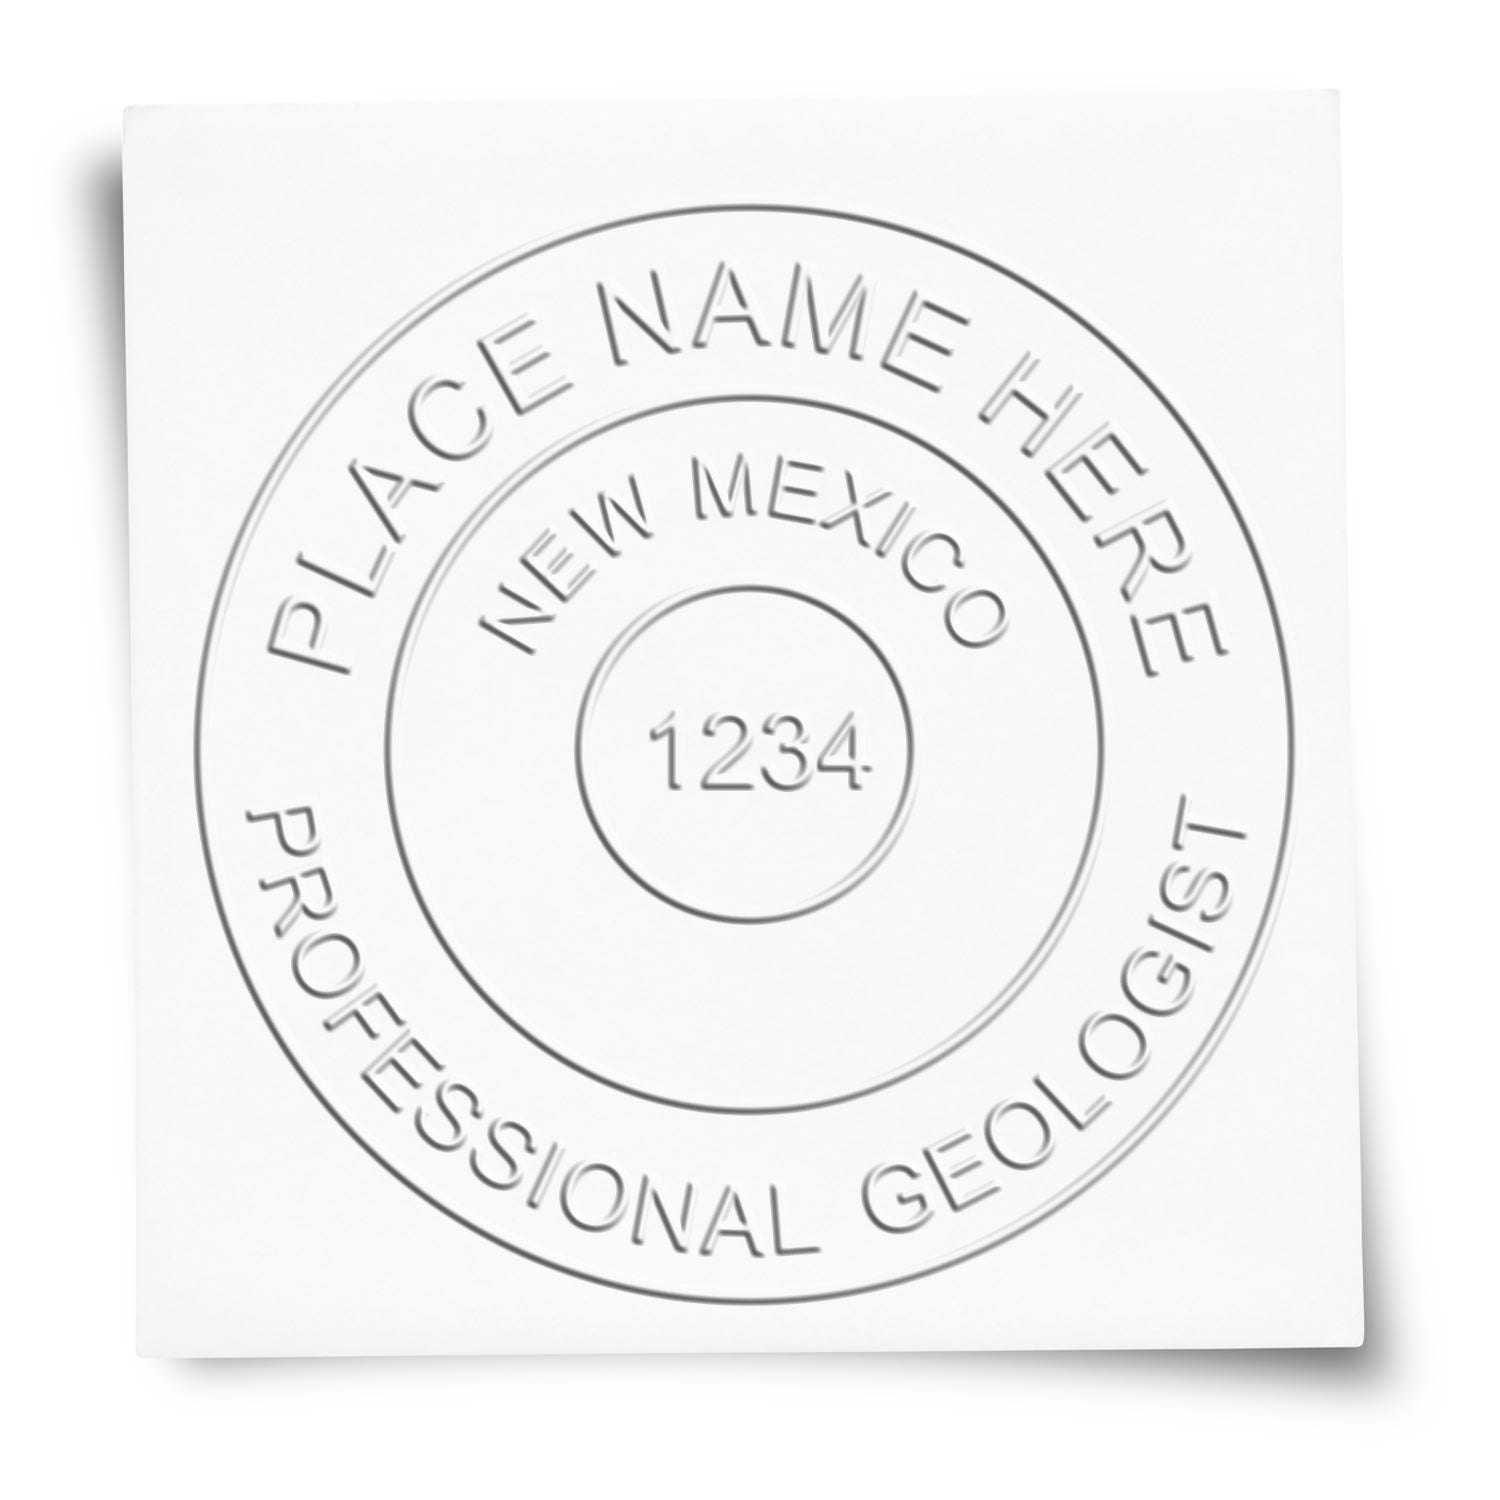 The main image for the Handheld New Mexico Professional Geologist Embosser depicting a sample of the imprint and imprint sample